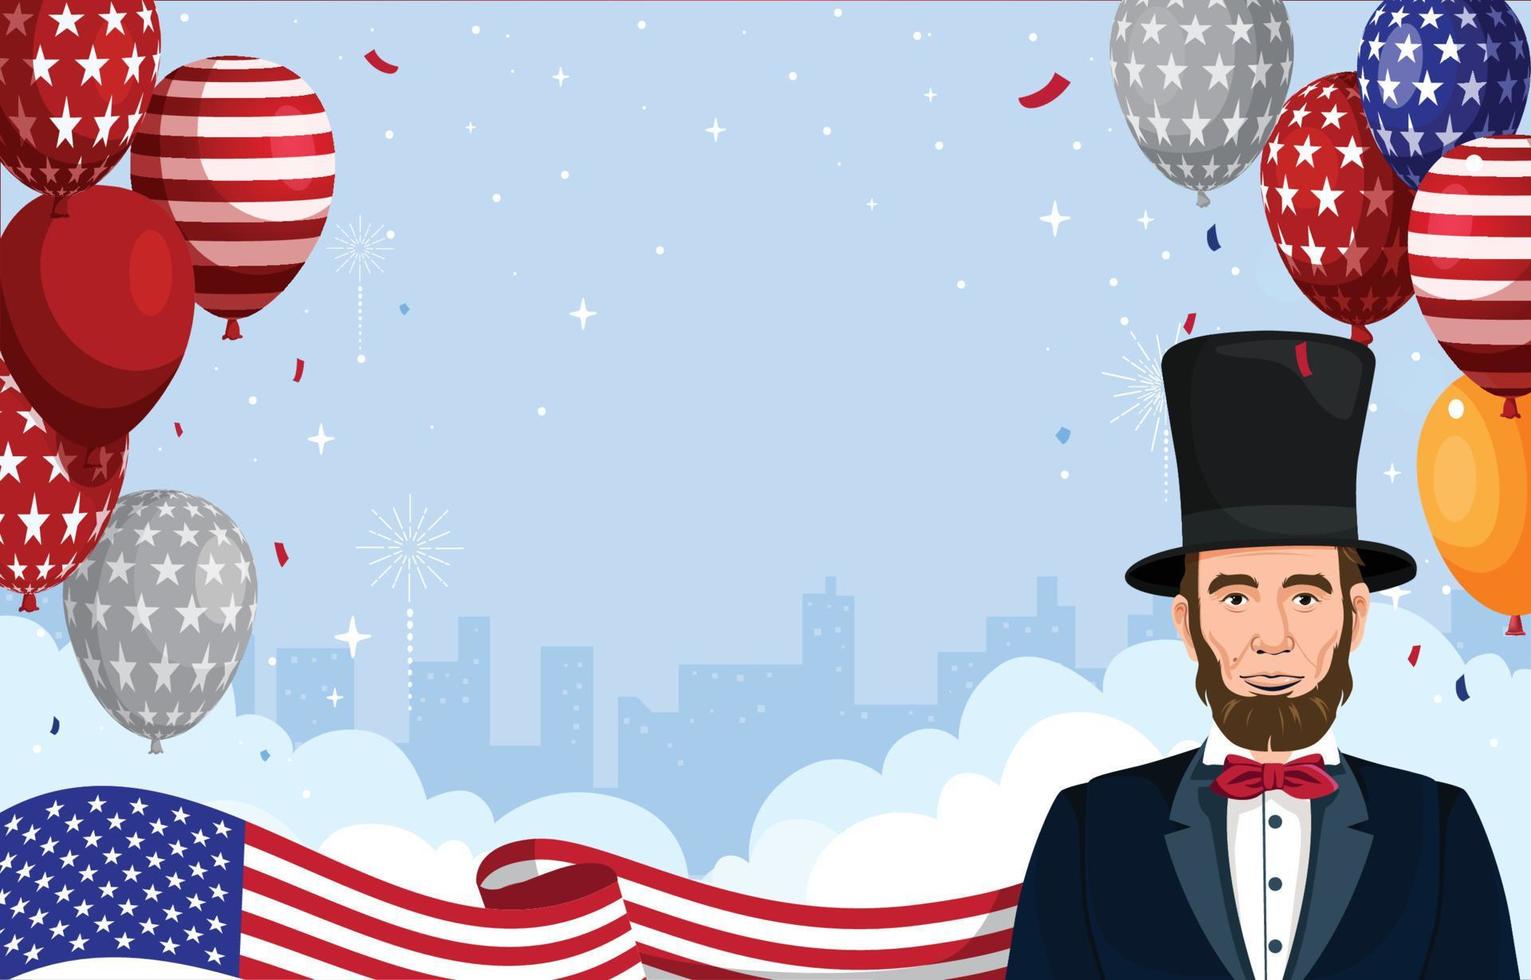 Abraham Lincoln Day Background vector